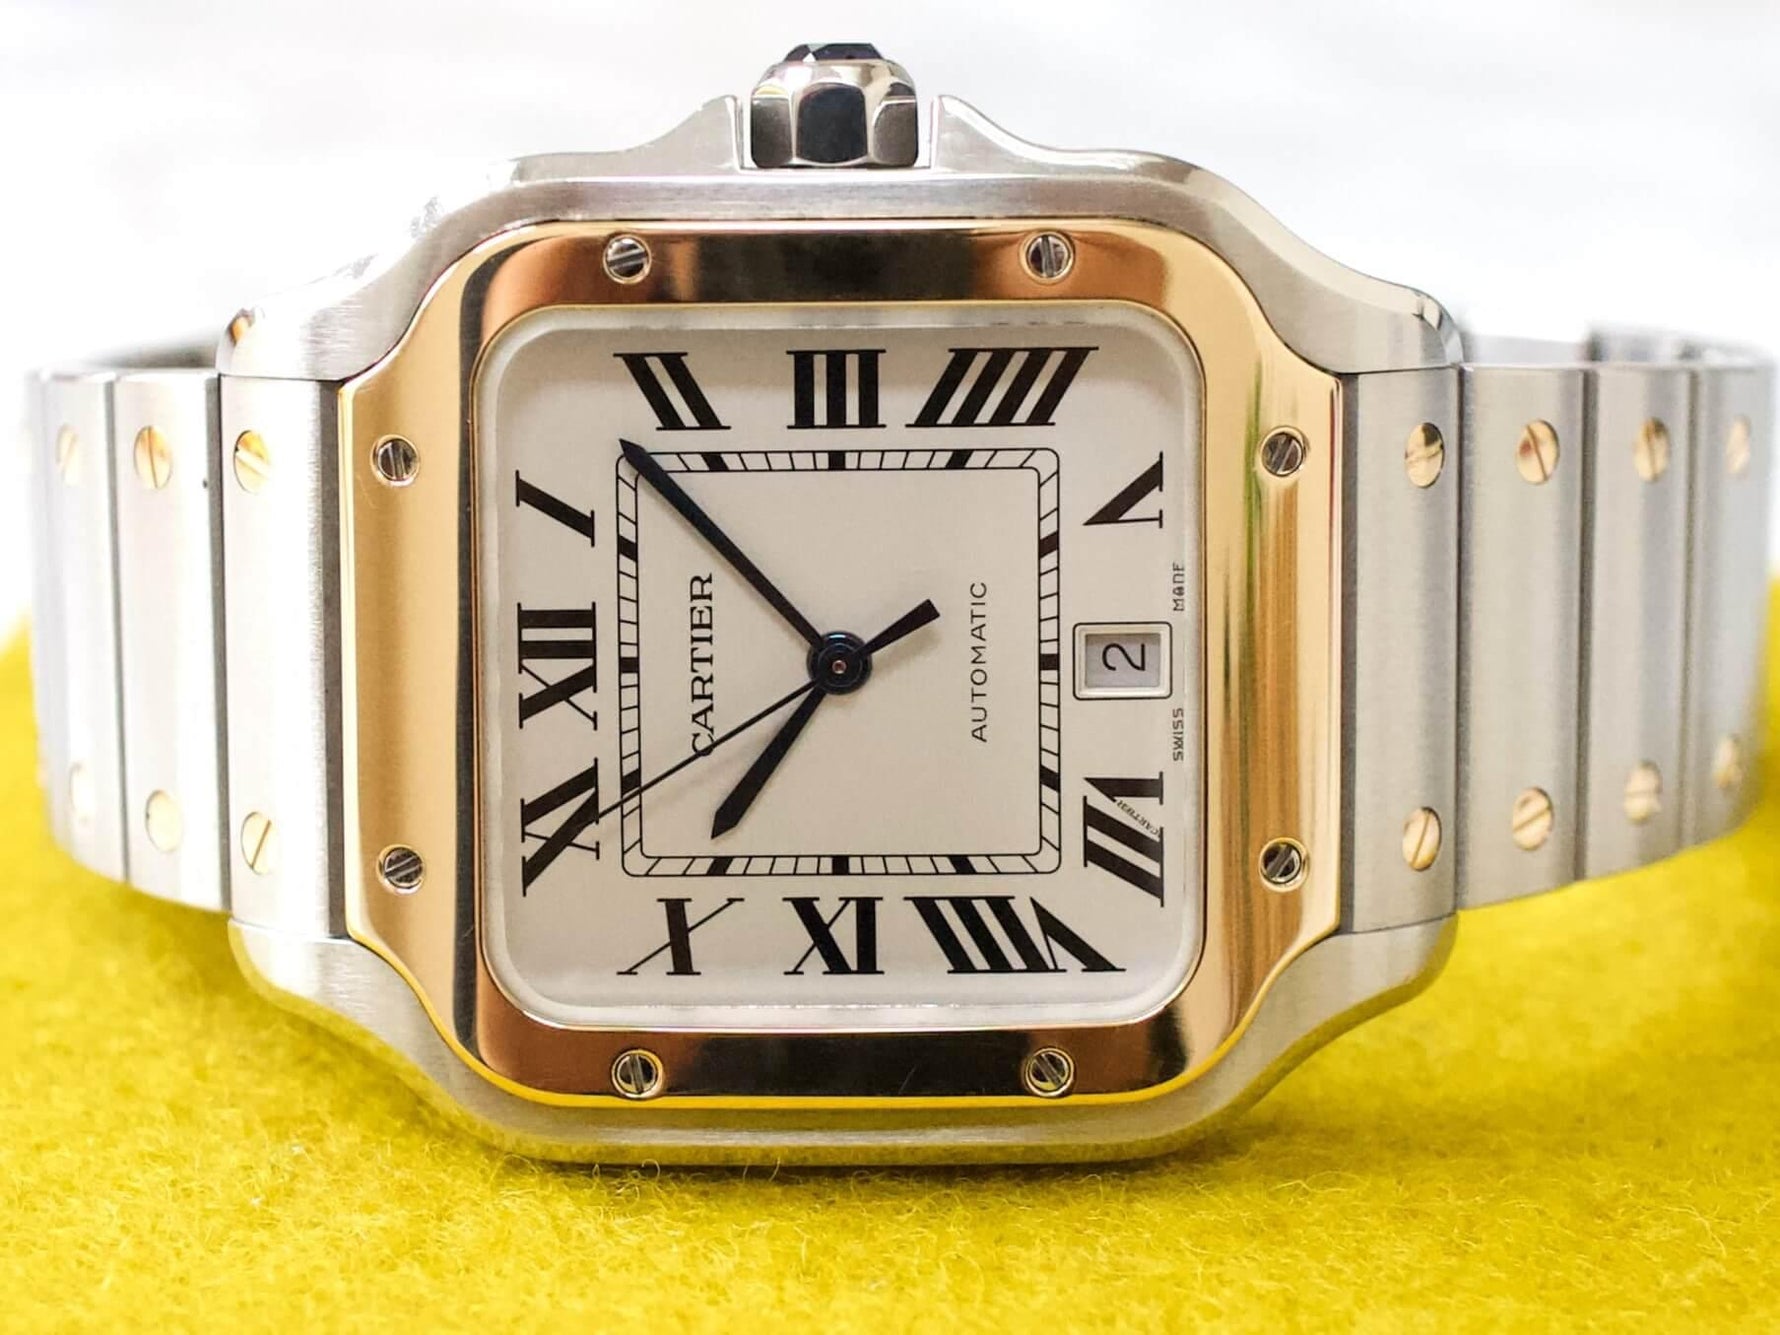 SOLDOUT: Cartier Santos W2SA0006 QuickLink System18K Gold and Steel LARGE Model (Original Retail: $11,600.00) - WearingTime Luxury Watches